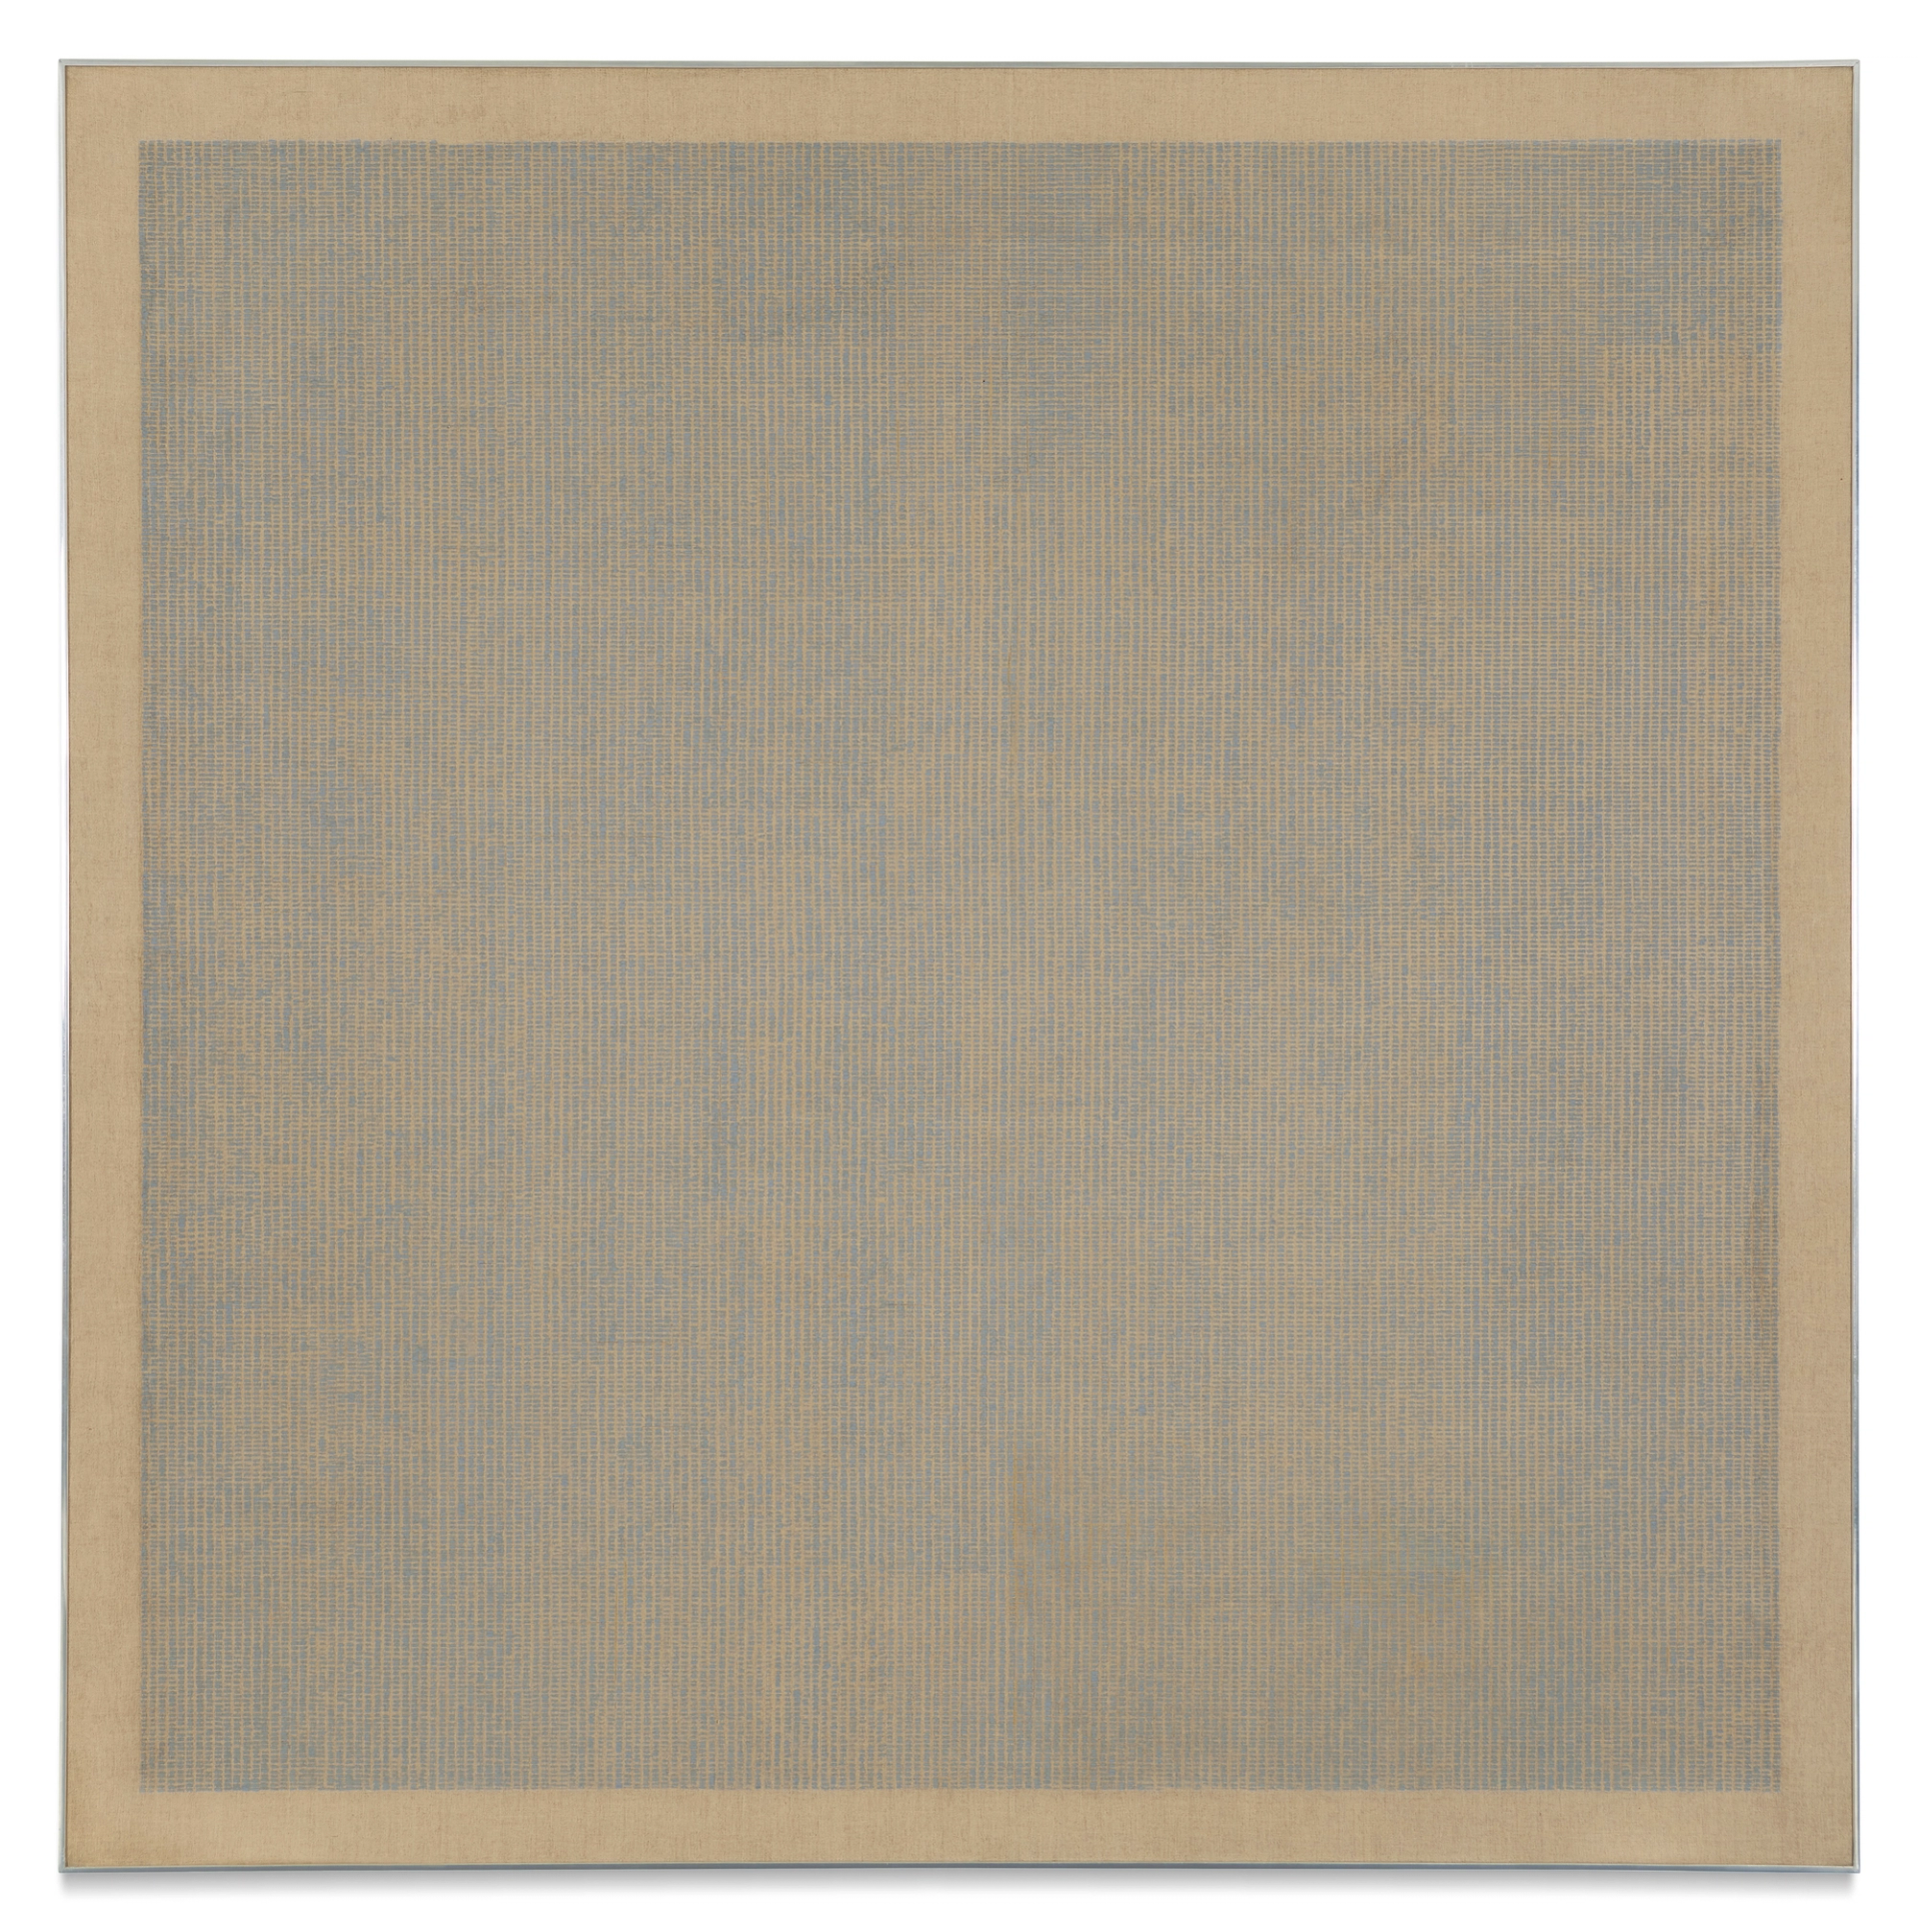 This work by Agnes Martin demonstrates her signature grid motif, done in grey against a cream background.